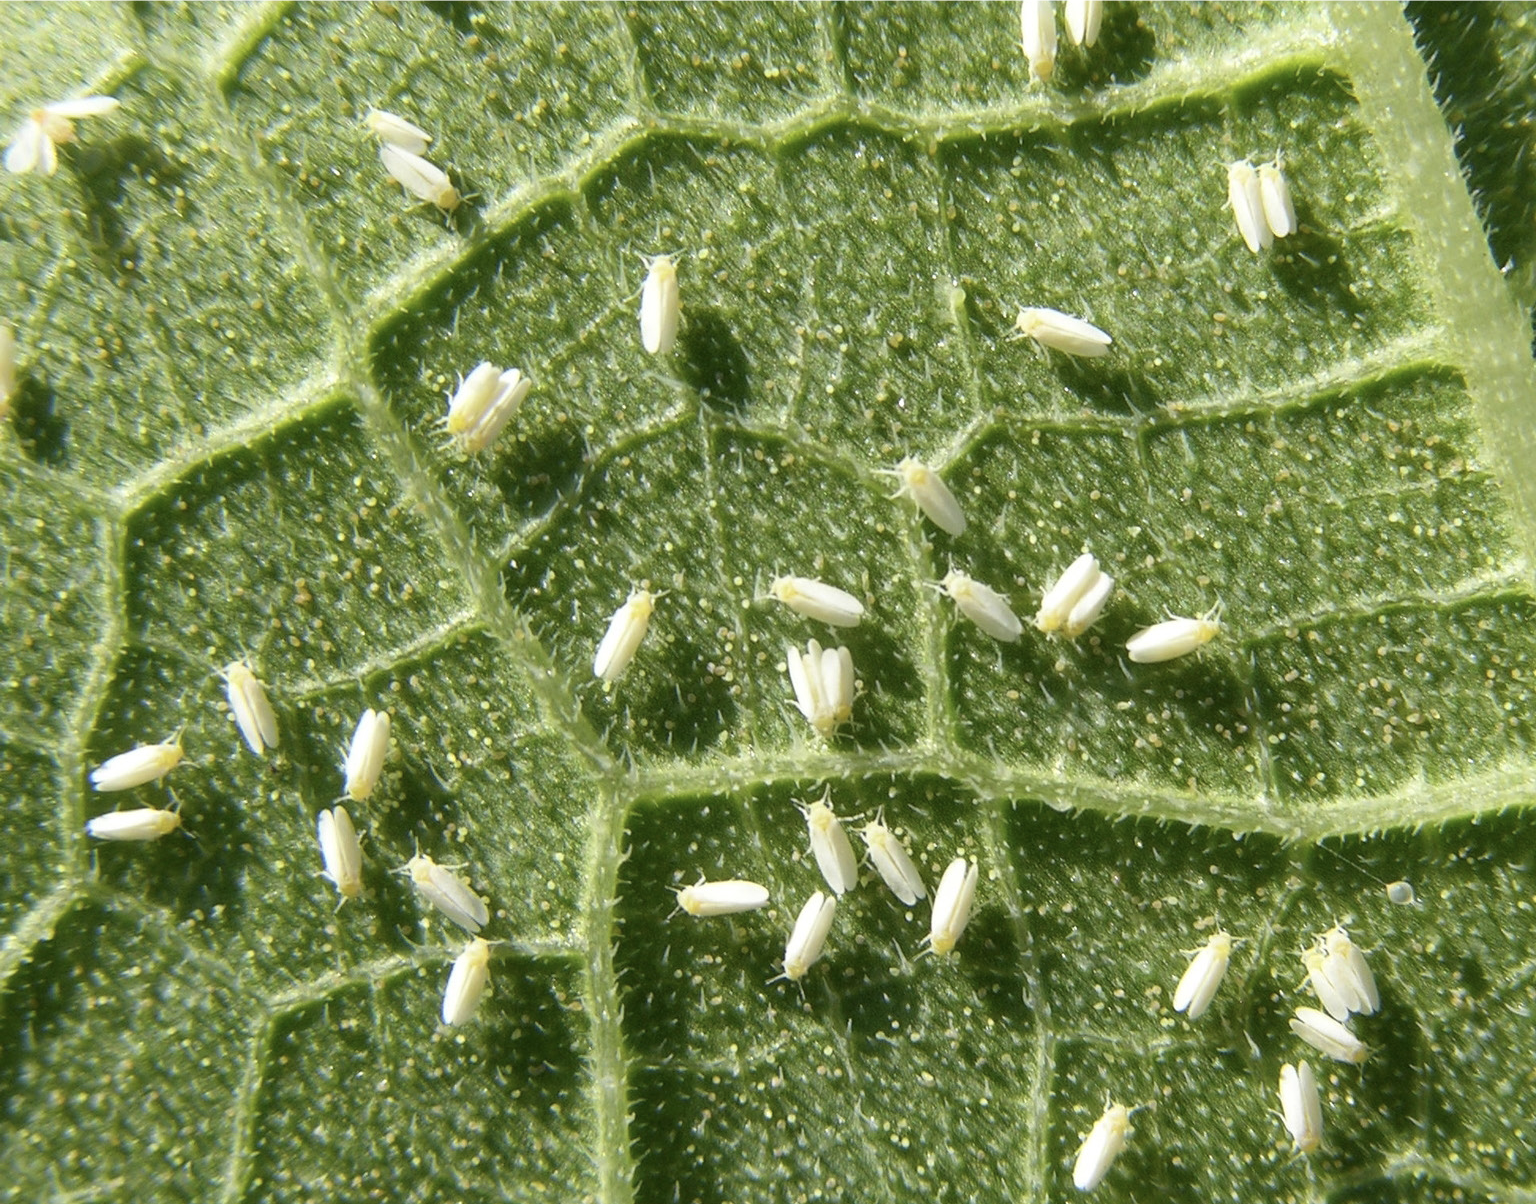 Nymphs of silverleaf whitefly